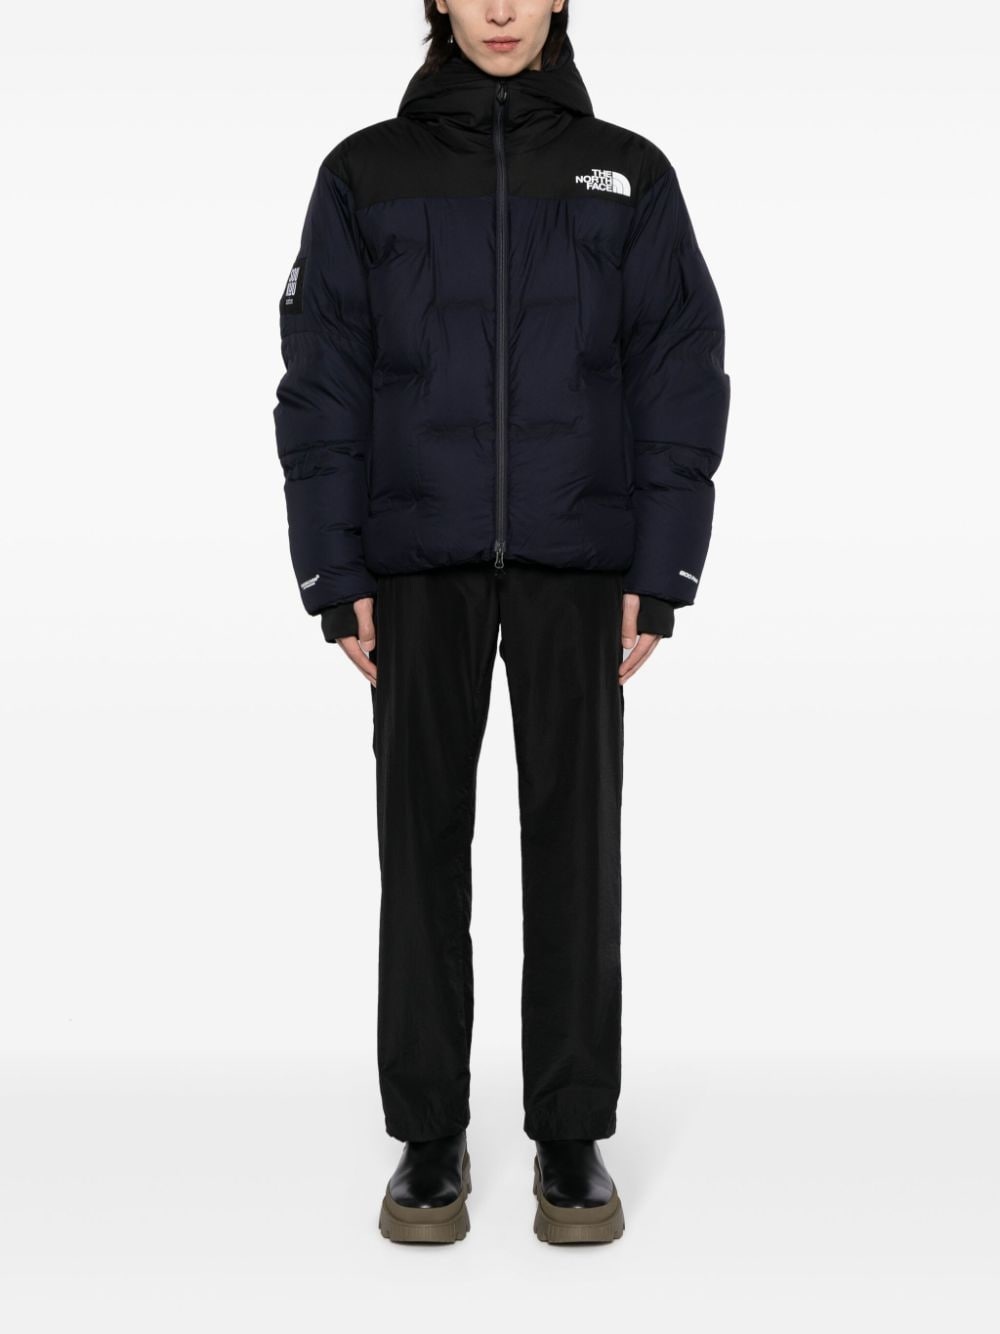 The North Face x Undercover Soukuu Cloud down Nuptse jacket | REVERSIBLE